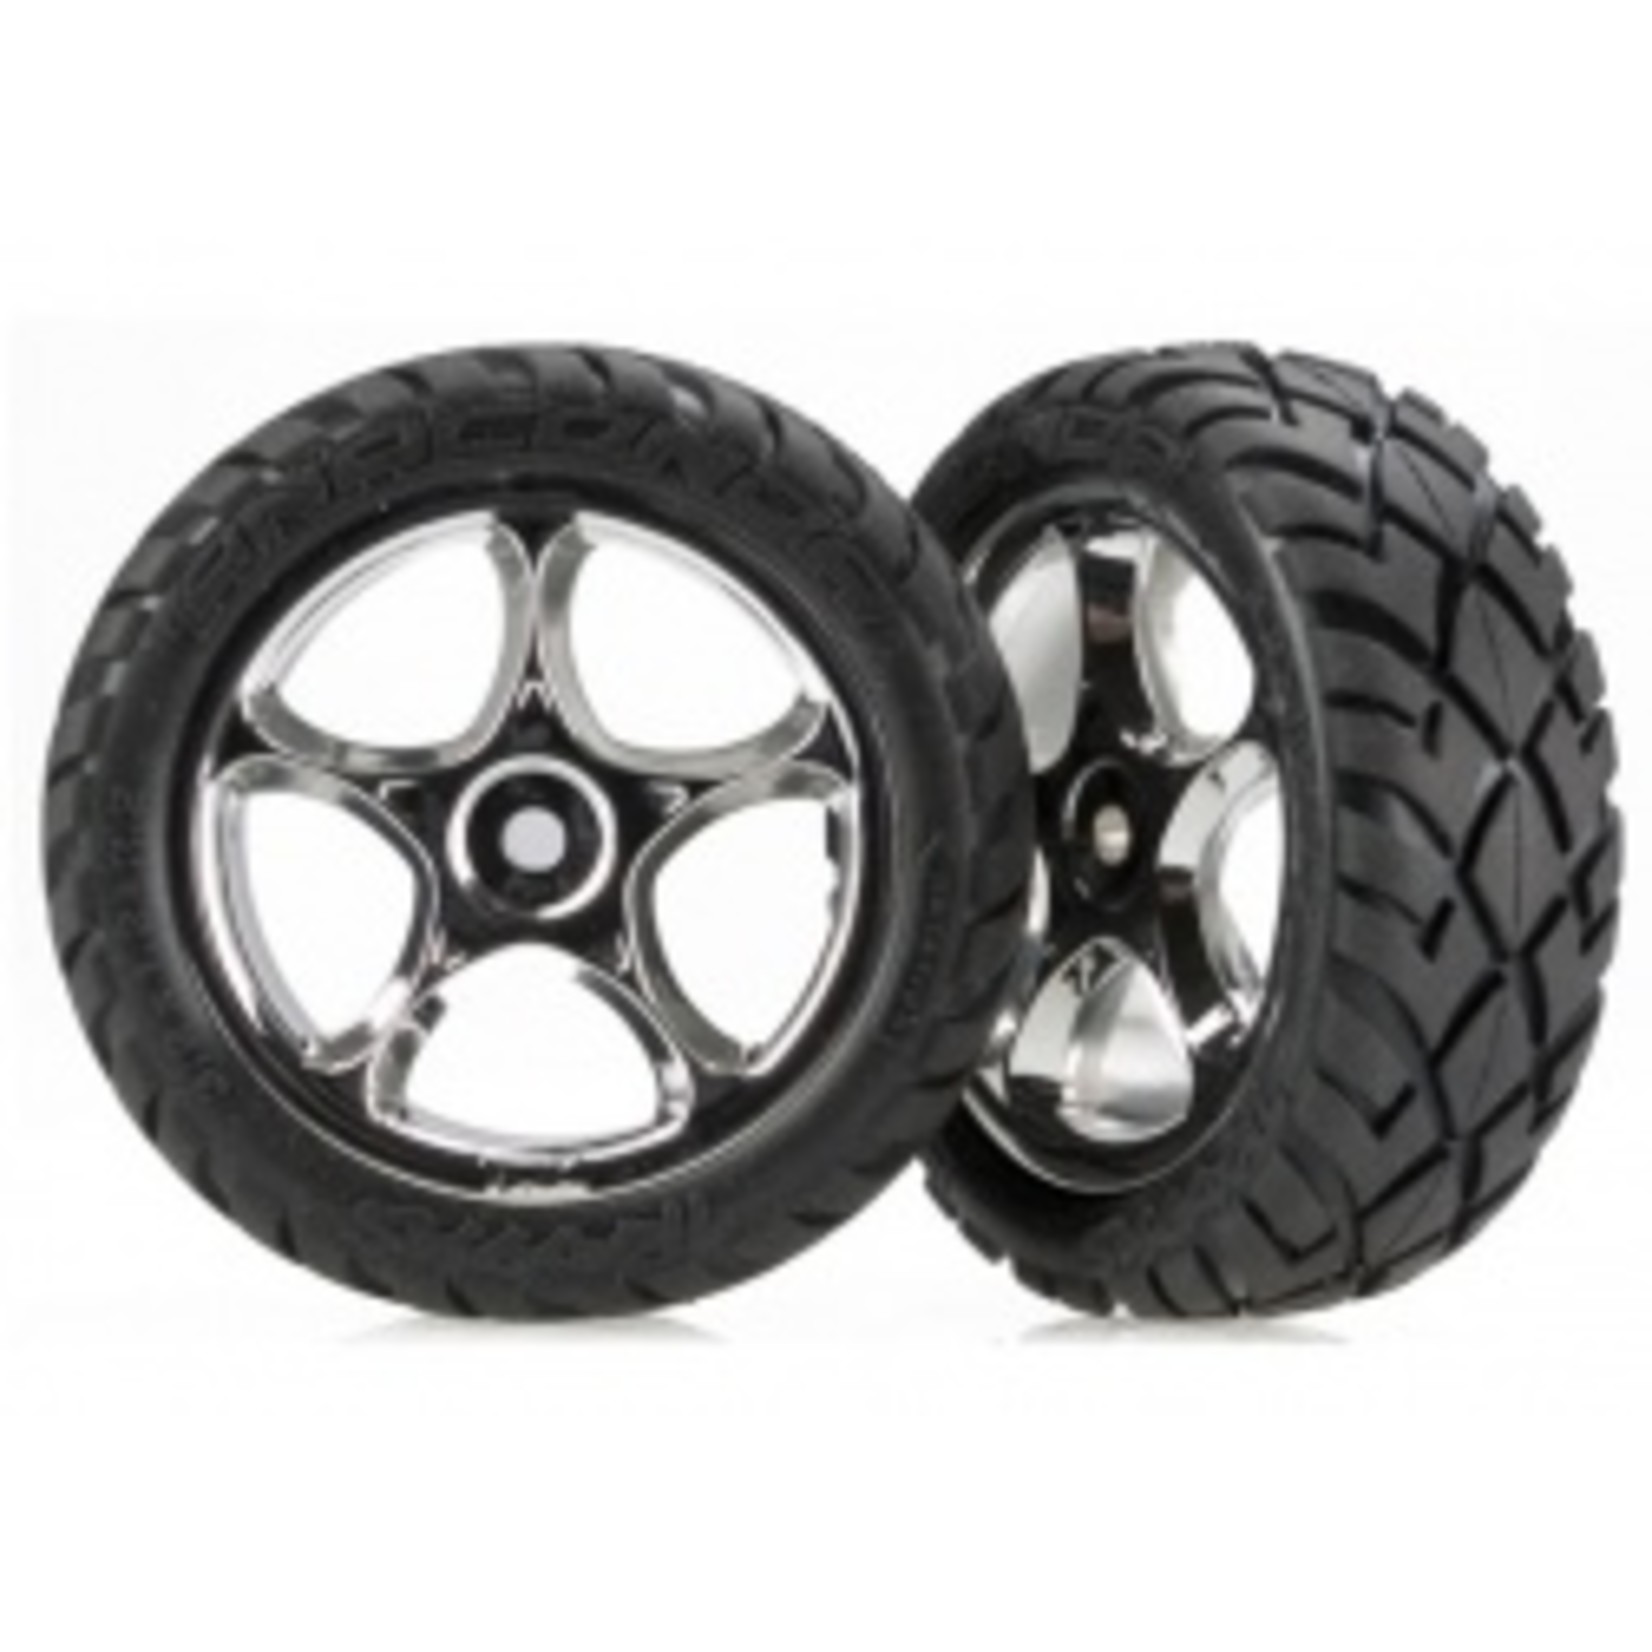 Traxxas Tires & wheels, assembled (Tracer 2.2" chrome wheels, Anaconda® 2.2" tires with foam inserts) (2) (Bandit® front)